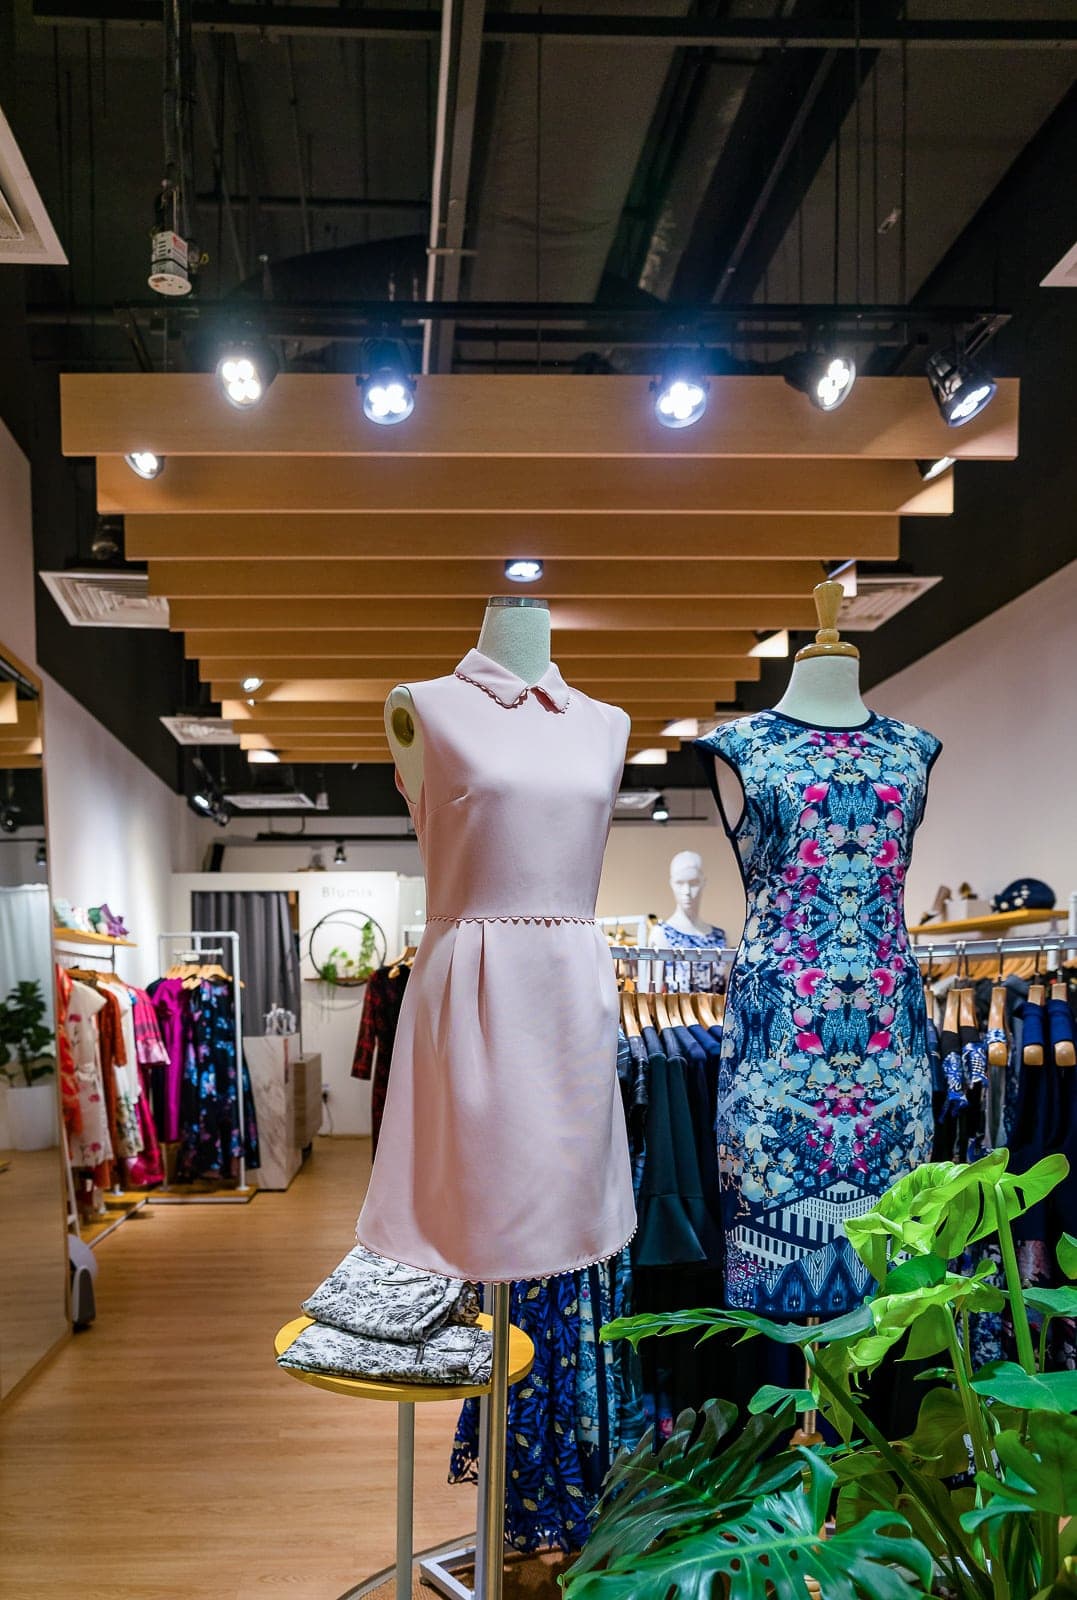 Women's Clothing Boutique: Elegant and Modern in Sensual Wood - ARTrend  Design Pte Ltd